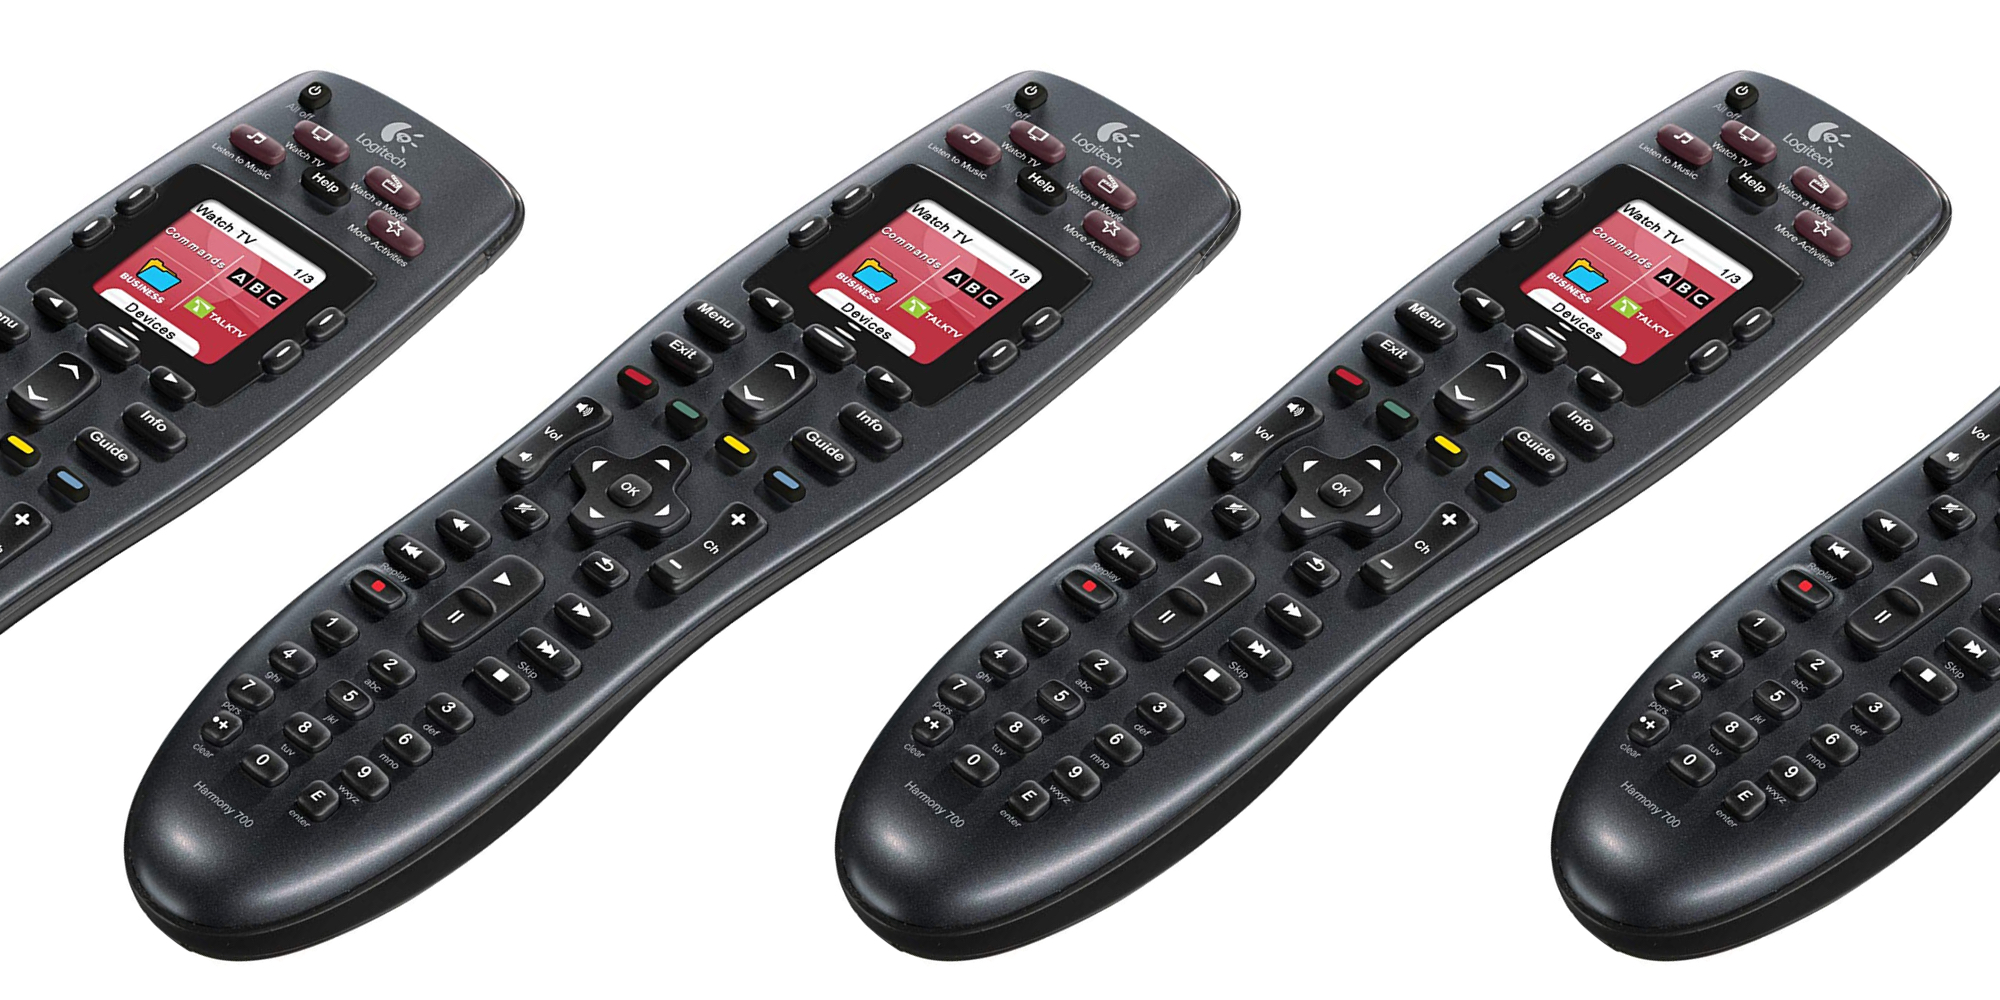 Logitech's Harmony 700 Remote controls to 8 devices: $50 shipped ($25 off)